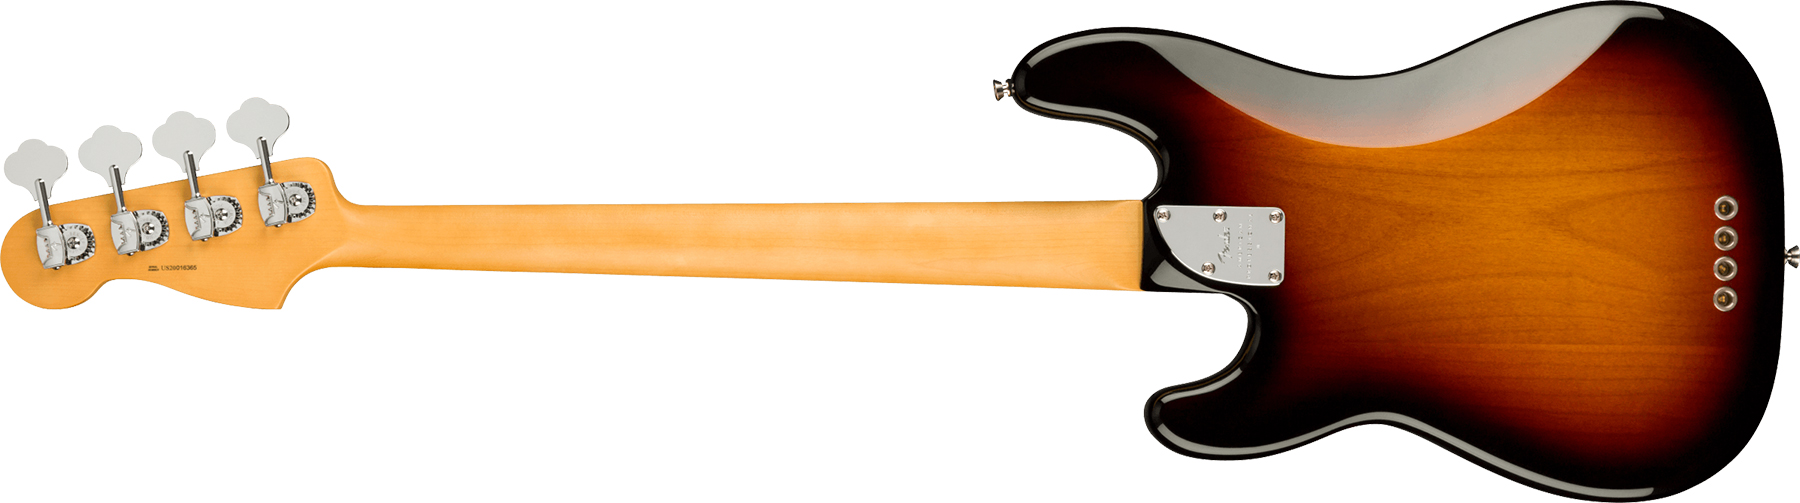 Fender Precision Bass American Professional Ii Usa Mn - 3-color Sunburst - Solid body electric bass - Variation 1